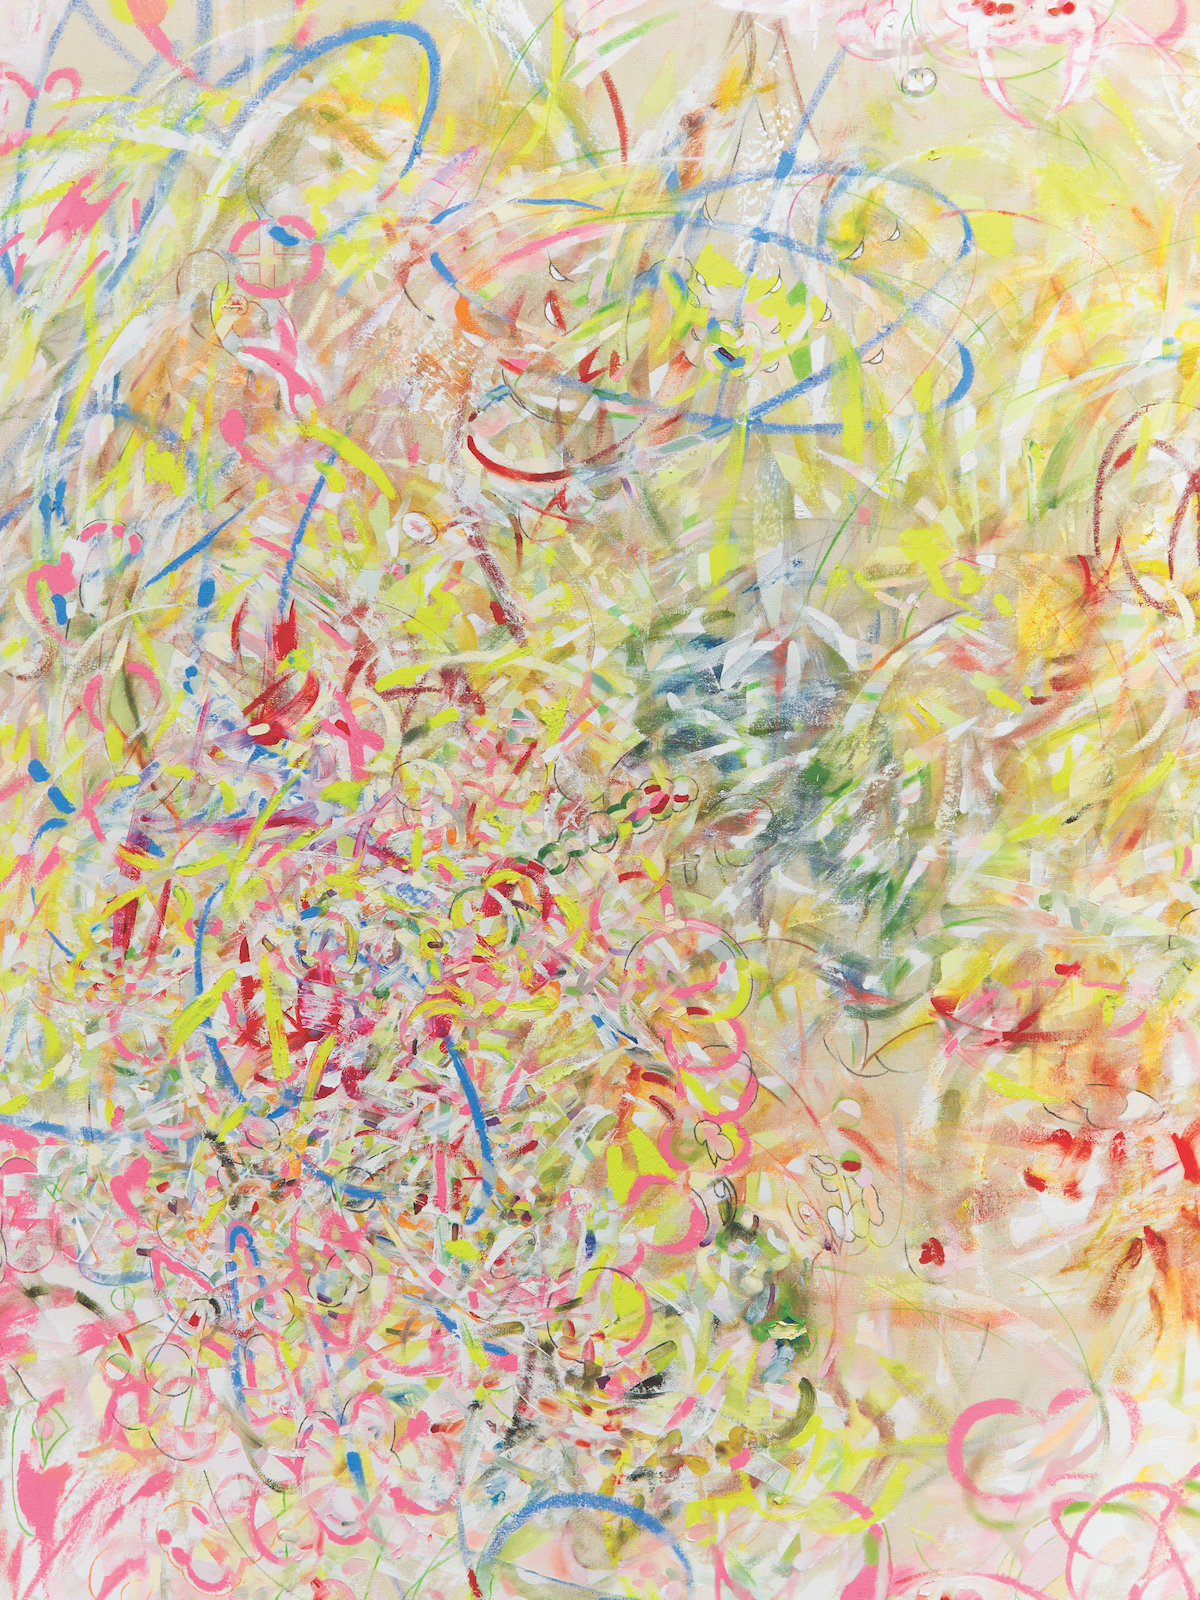 An abstract assemblage of curly lines and squiggles, in yellow, pink, green, blue, and other shades.